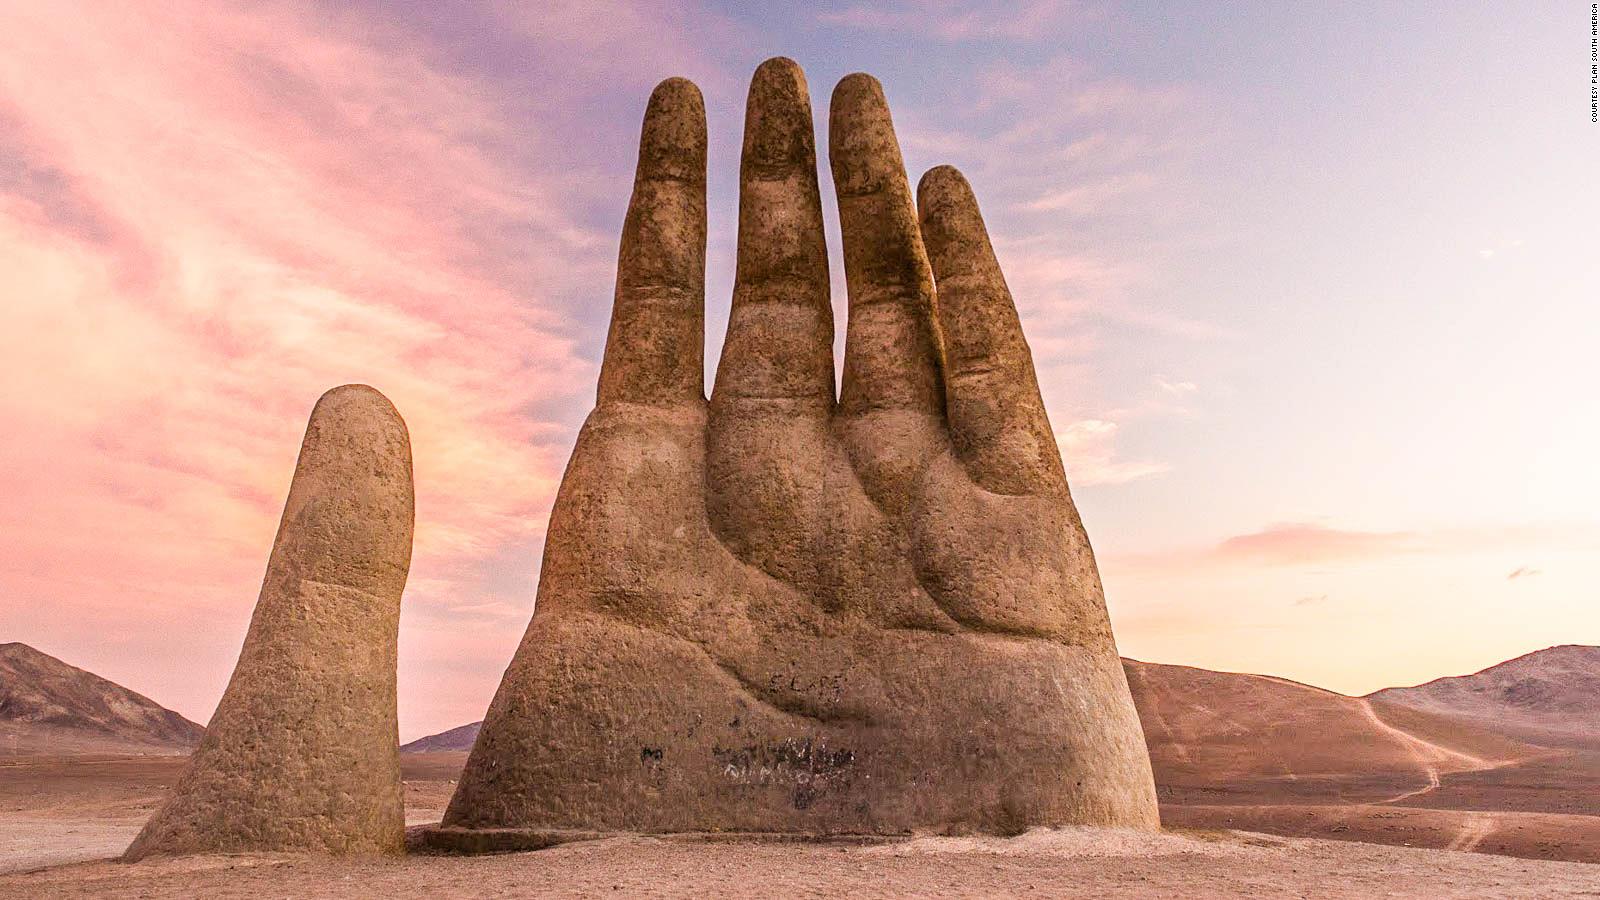 Chile: the “Hand of the Desert”, a most impressive work